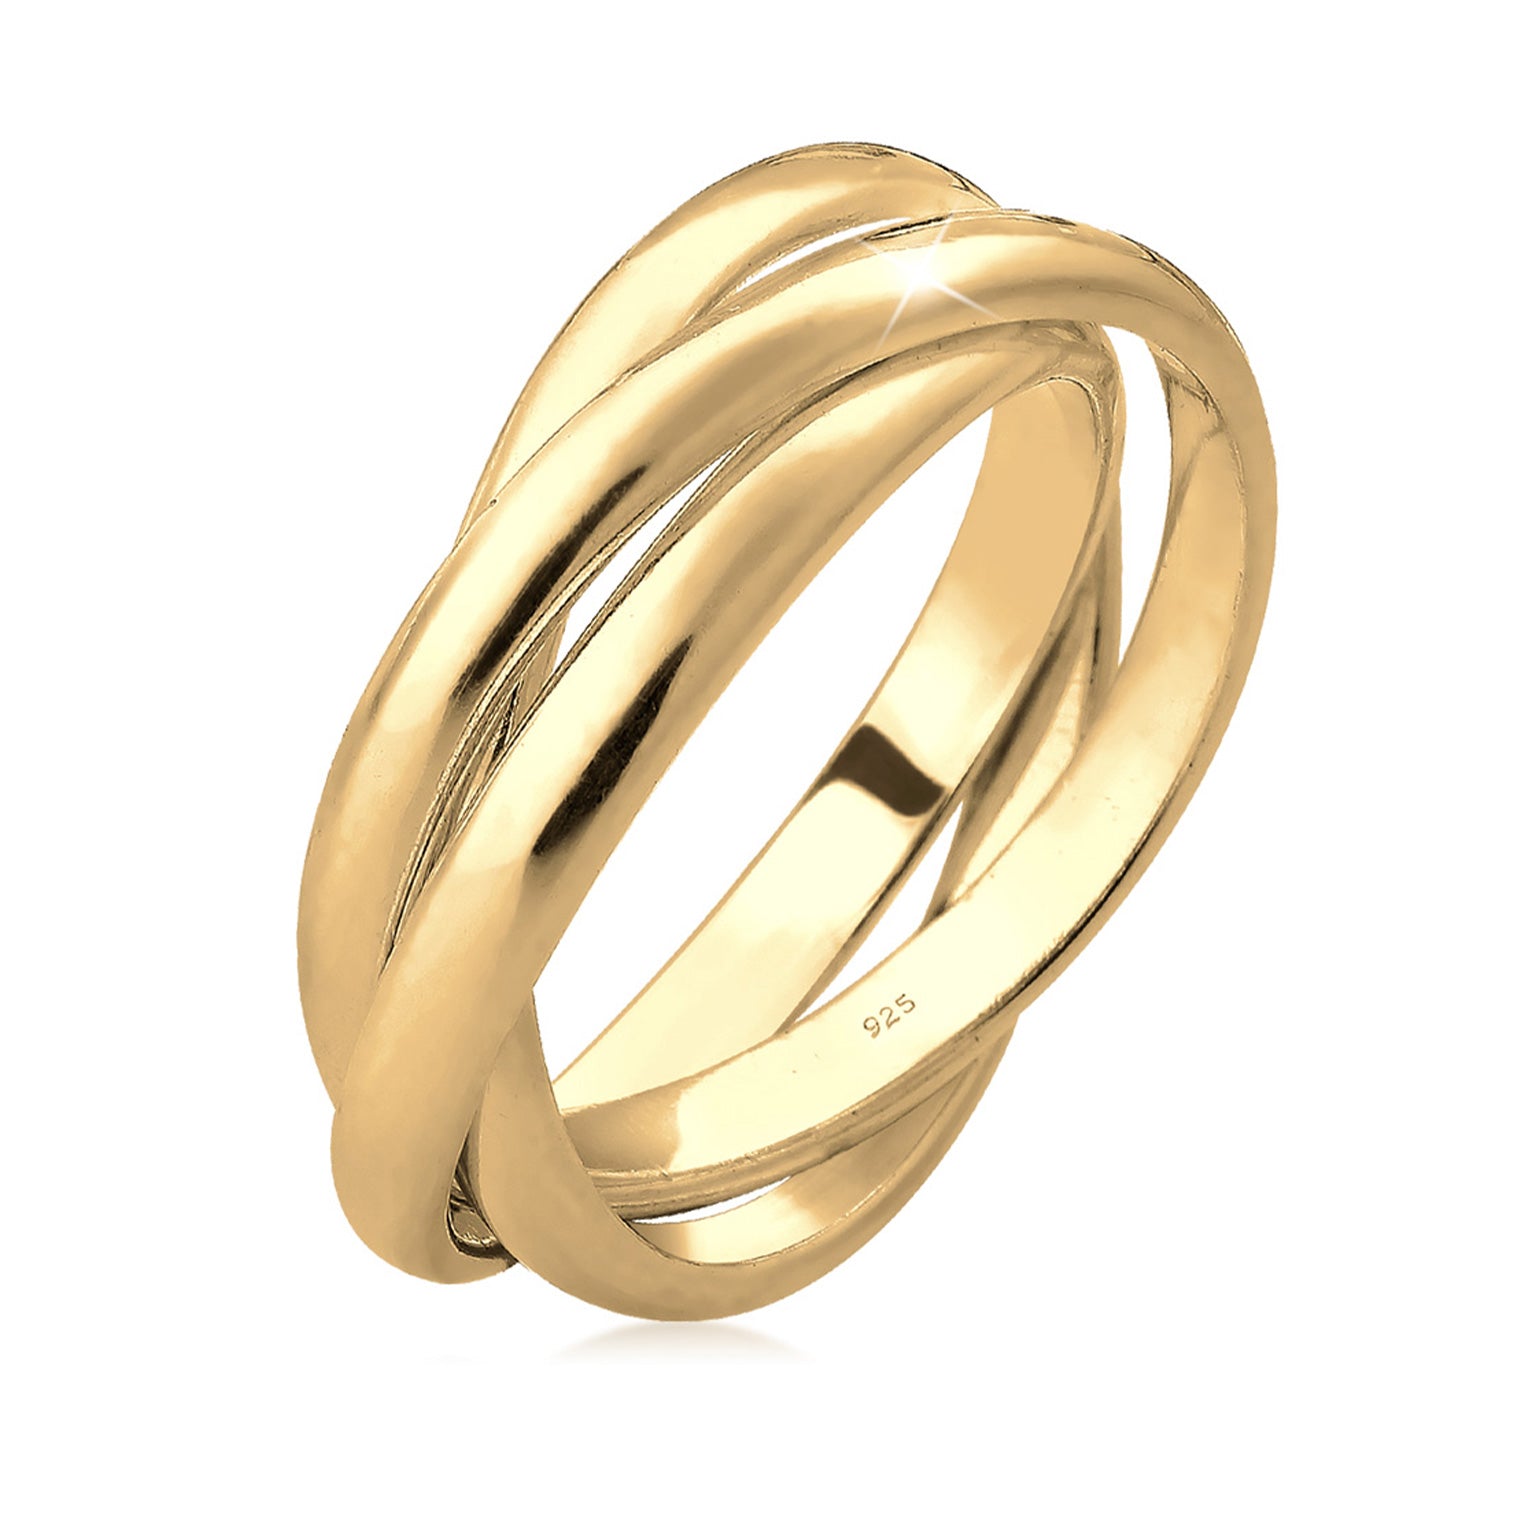 Rings made of silver from gold buy selection Jewelry | – | or TOP Elli Elli